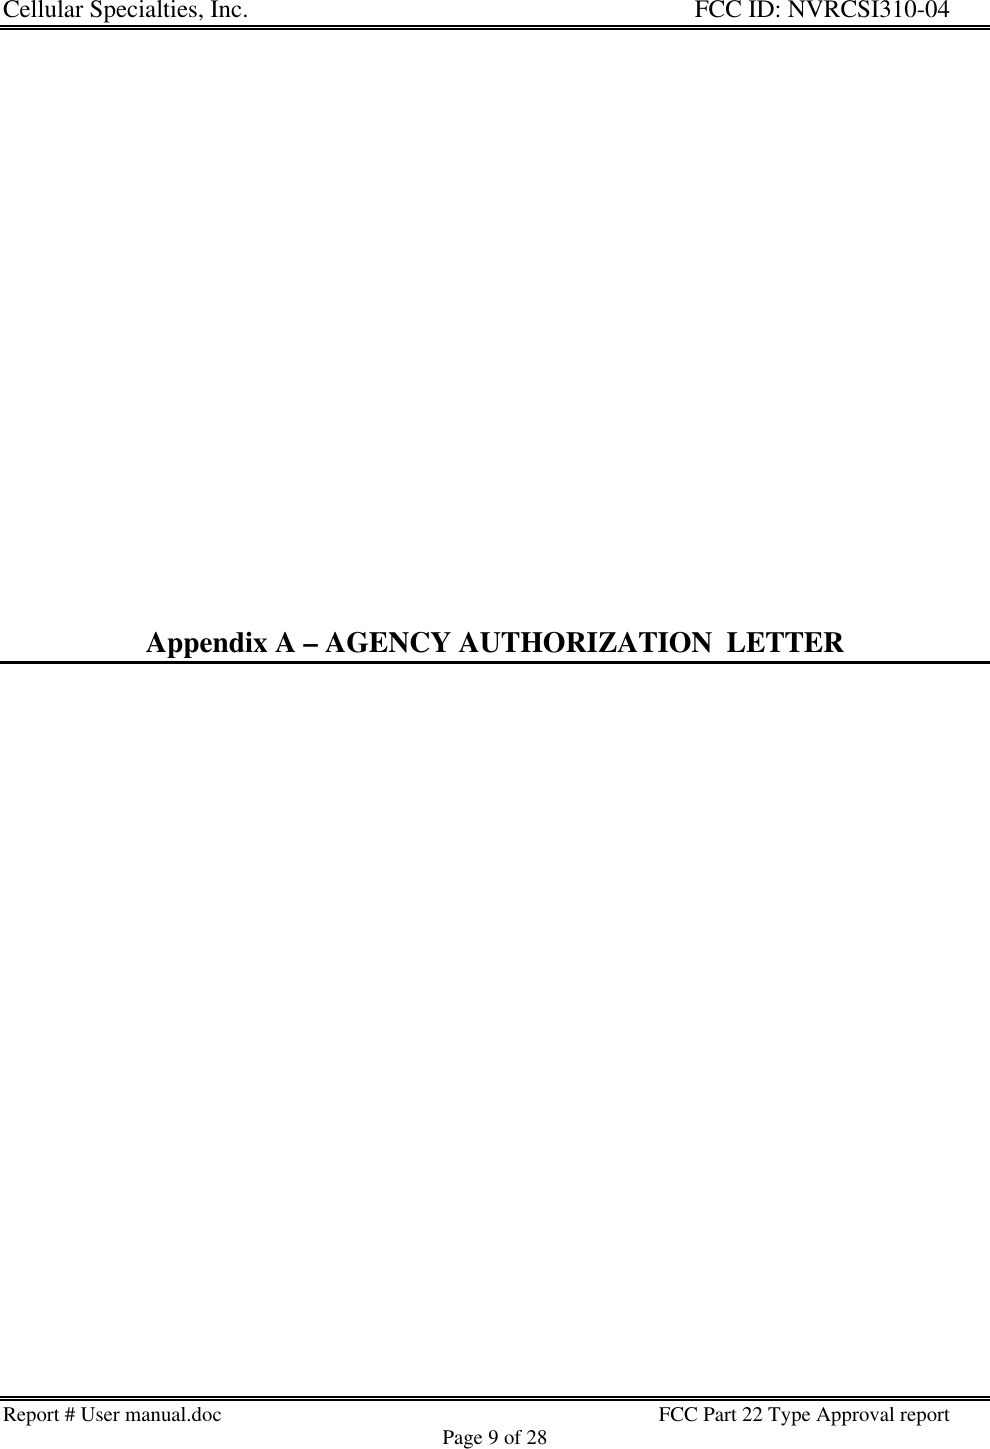 Cellular Specialties, Inc. FCC ID: NVRCSI310-04Report # User manual.doc FCC Part 22 Type Approval reportPage 9 of 28Appendix A – AGENCY AUTHORIZATION  LETTER